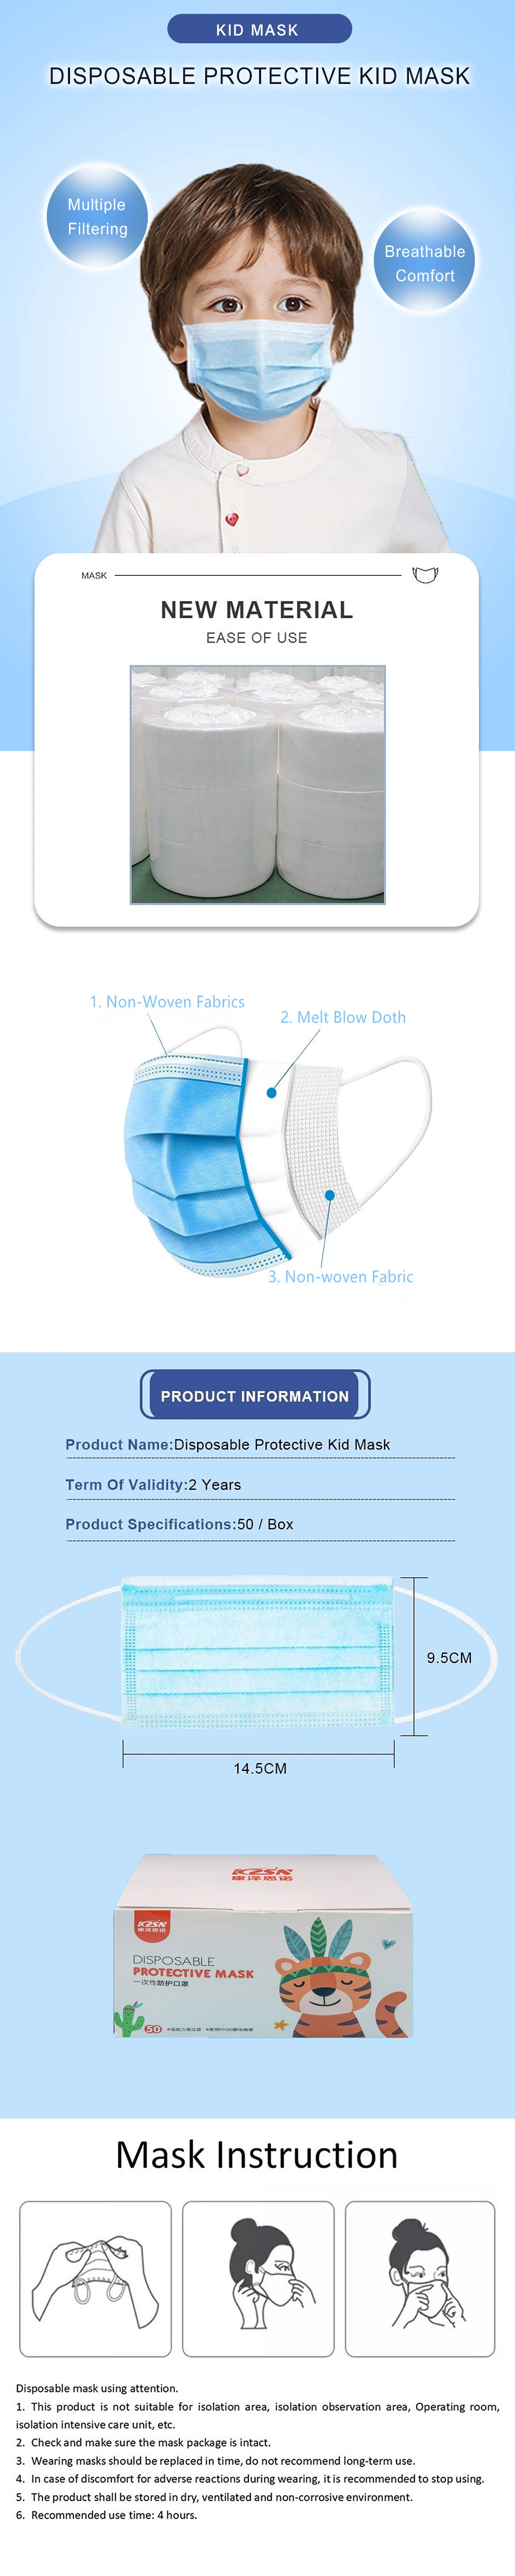 Earloop Child Mask Face 3ply, Disposable Face Mask Personal Protective Equipment for Kids for Children